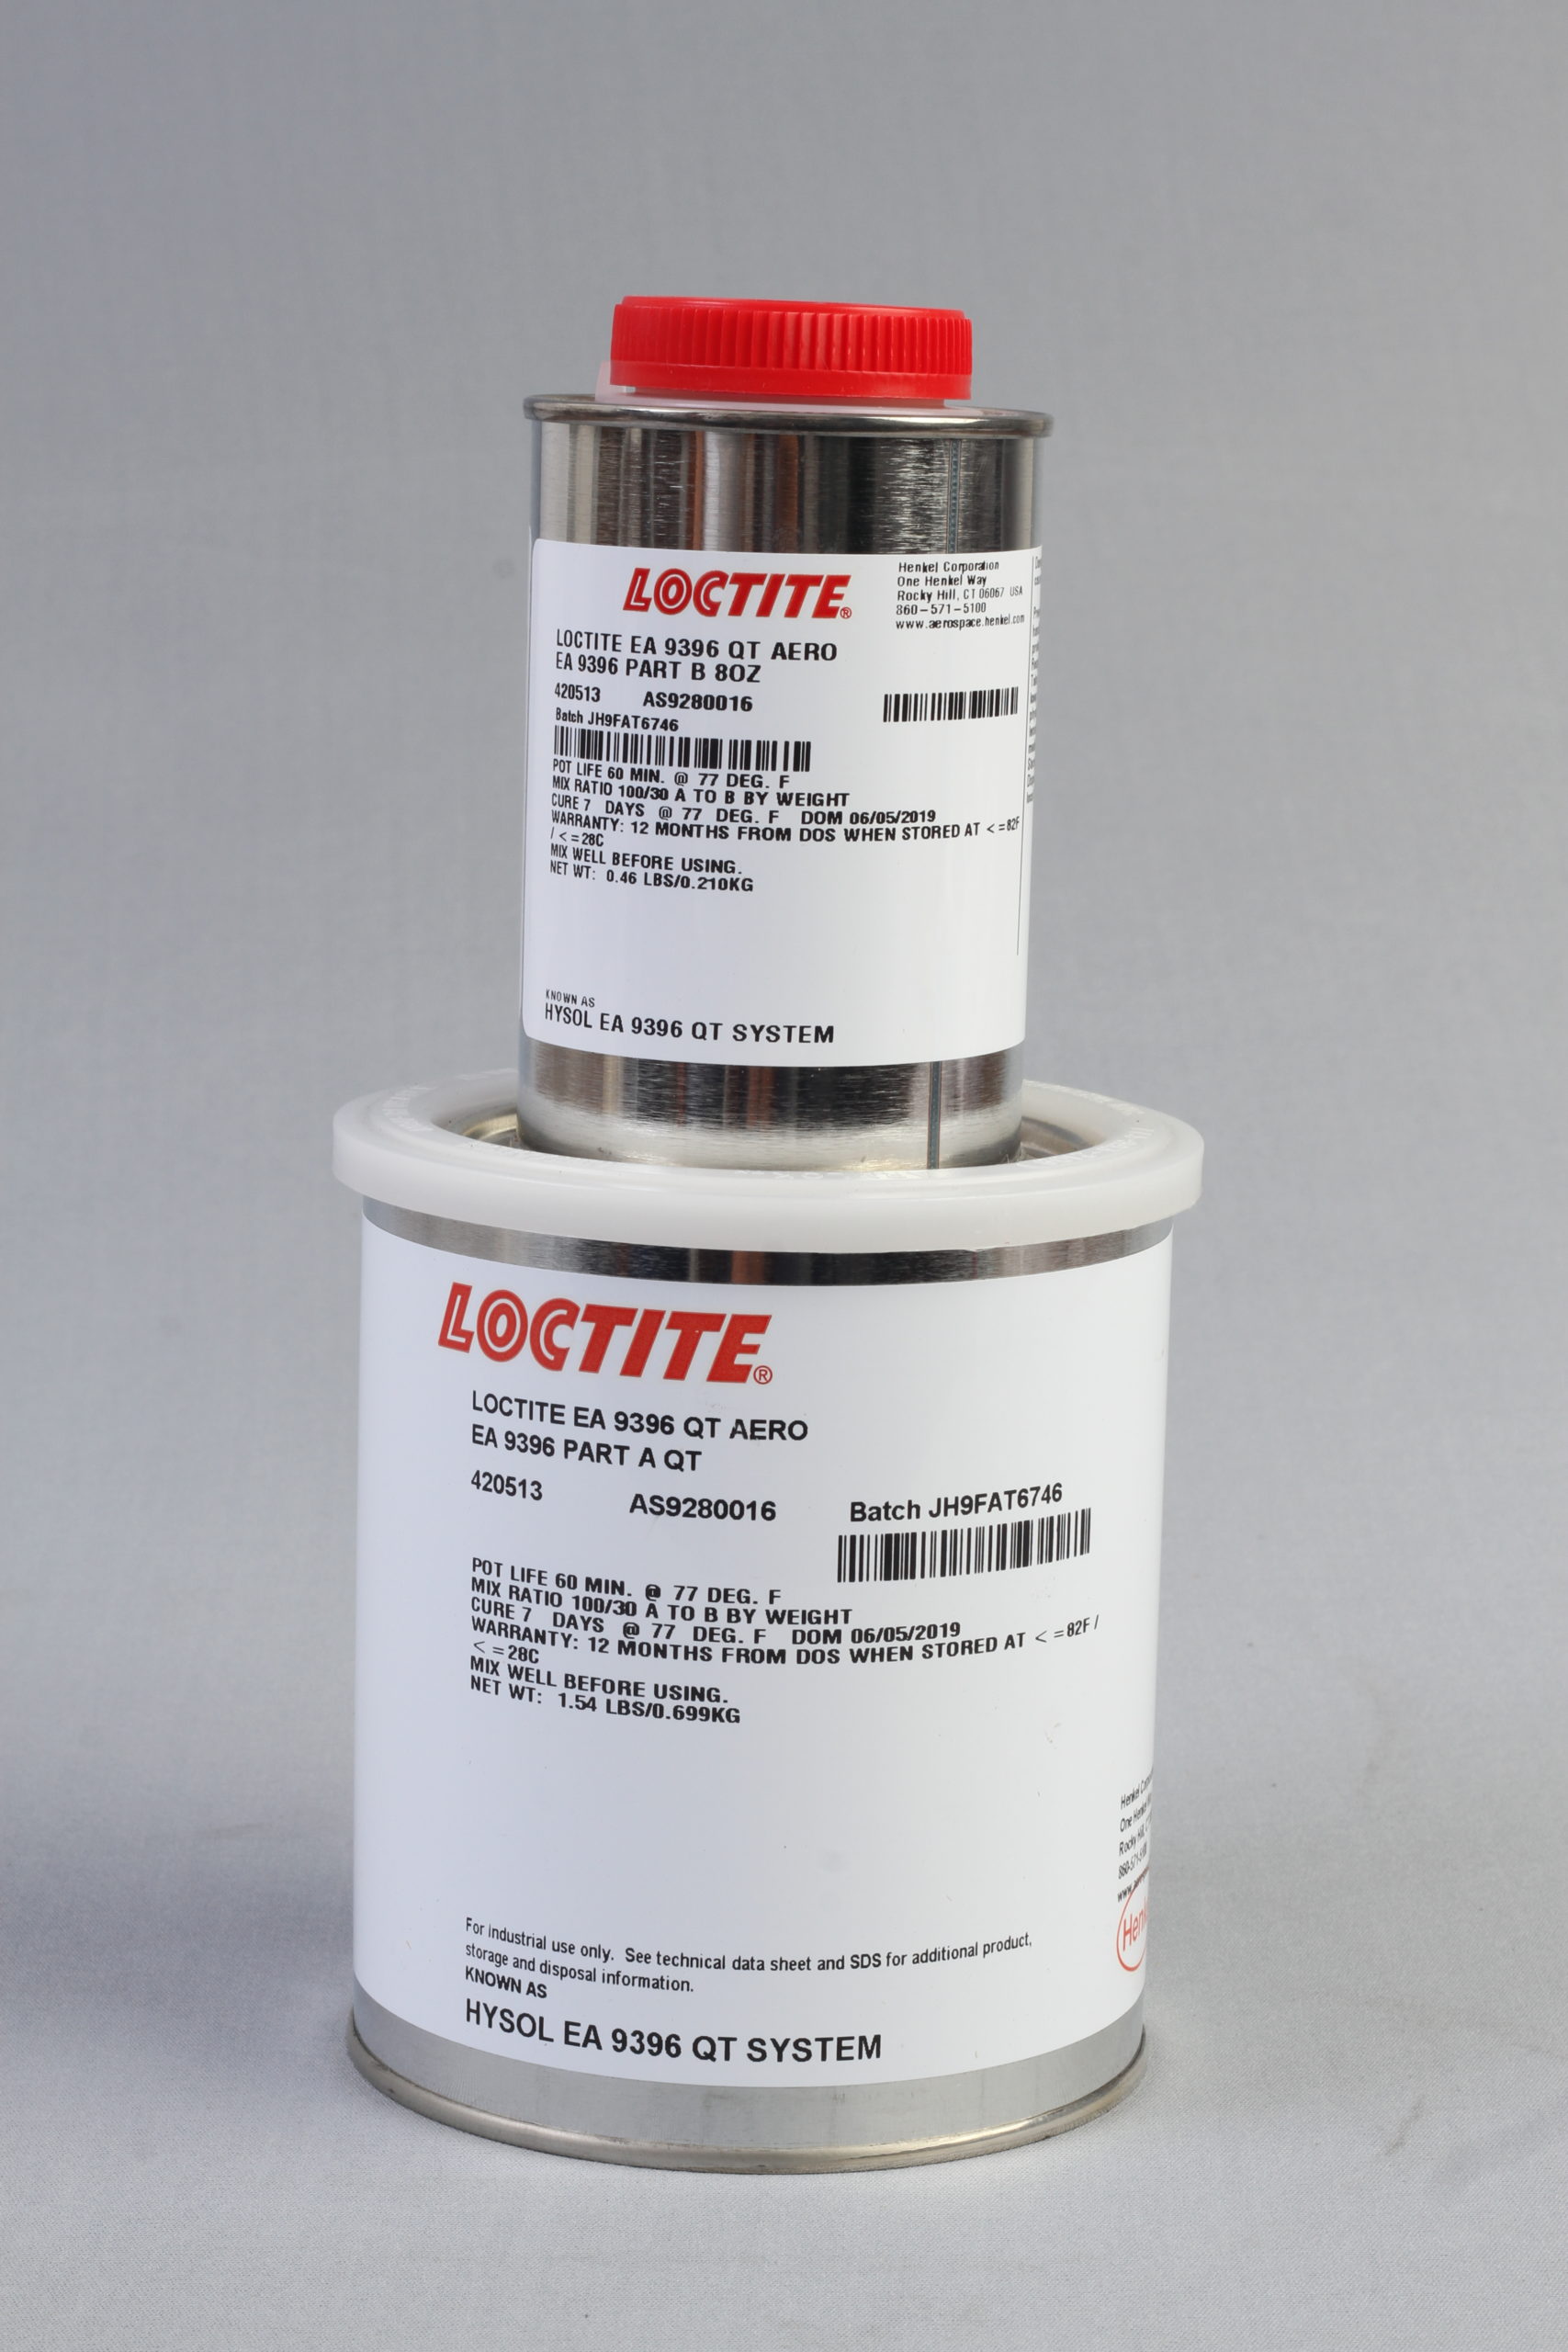 x5-product-https://x5company.com/wp-content/uploads/2020/06/linha-hysol-loctite-hysol-9396-qt-system-scaled.jpg